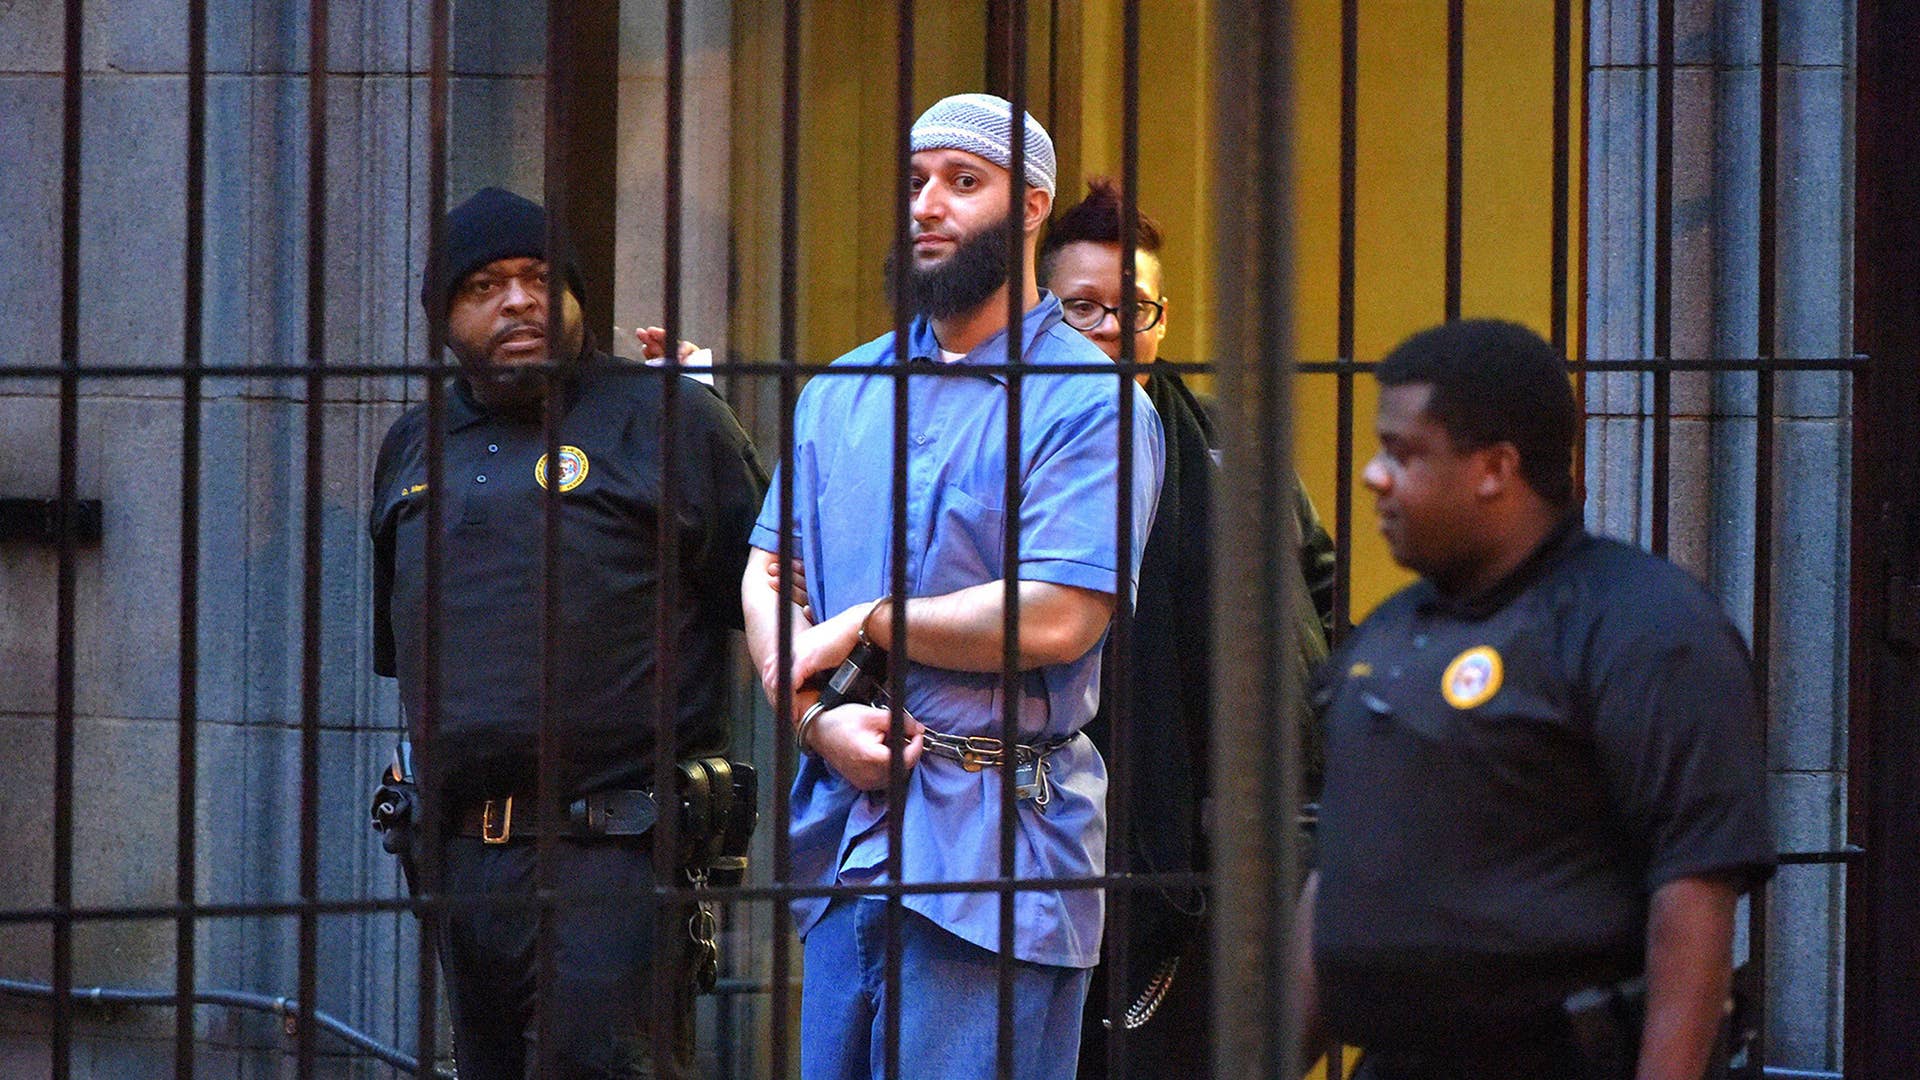 Adnan Syed at a courthouse in 2016 during a retrial